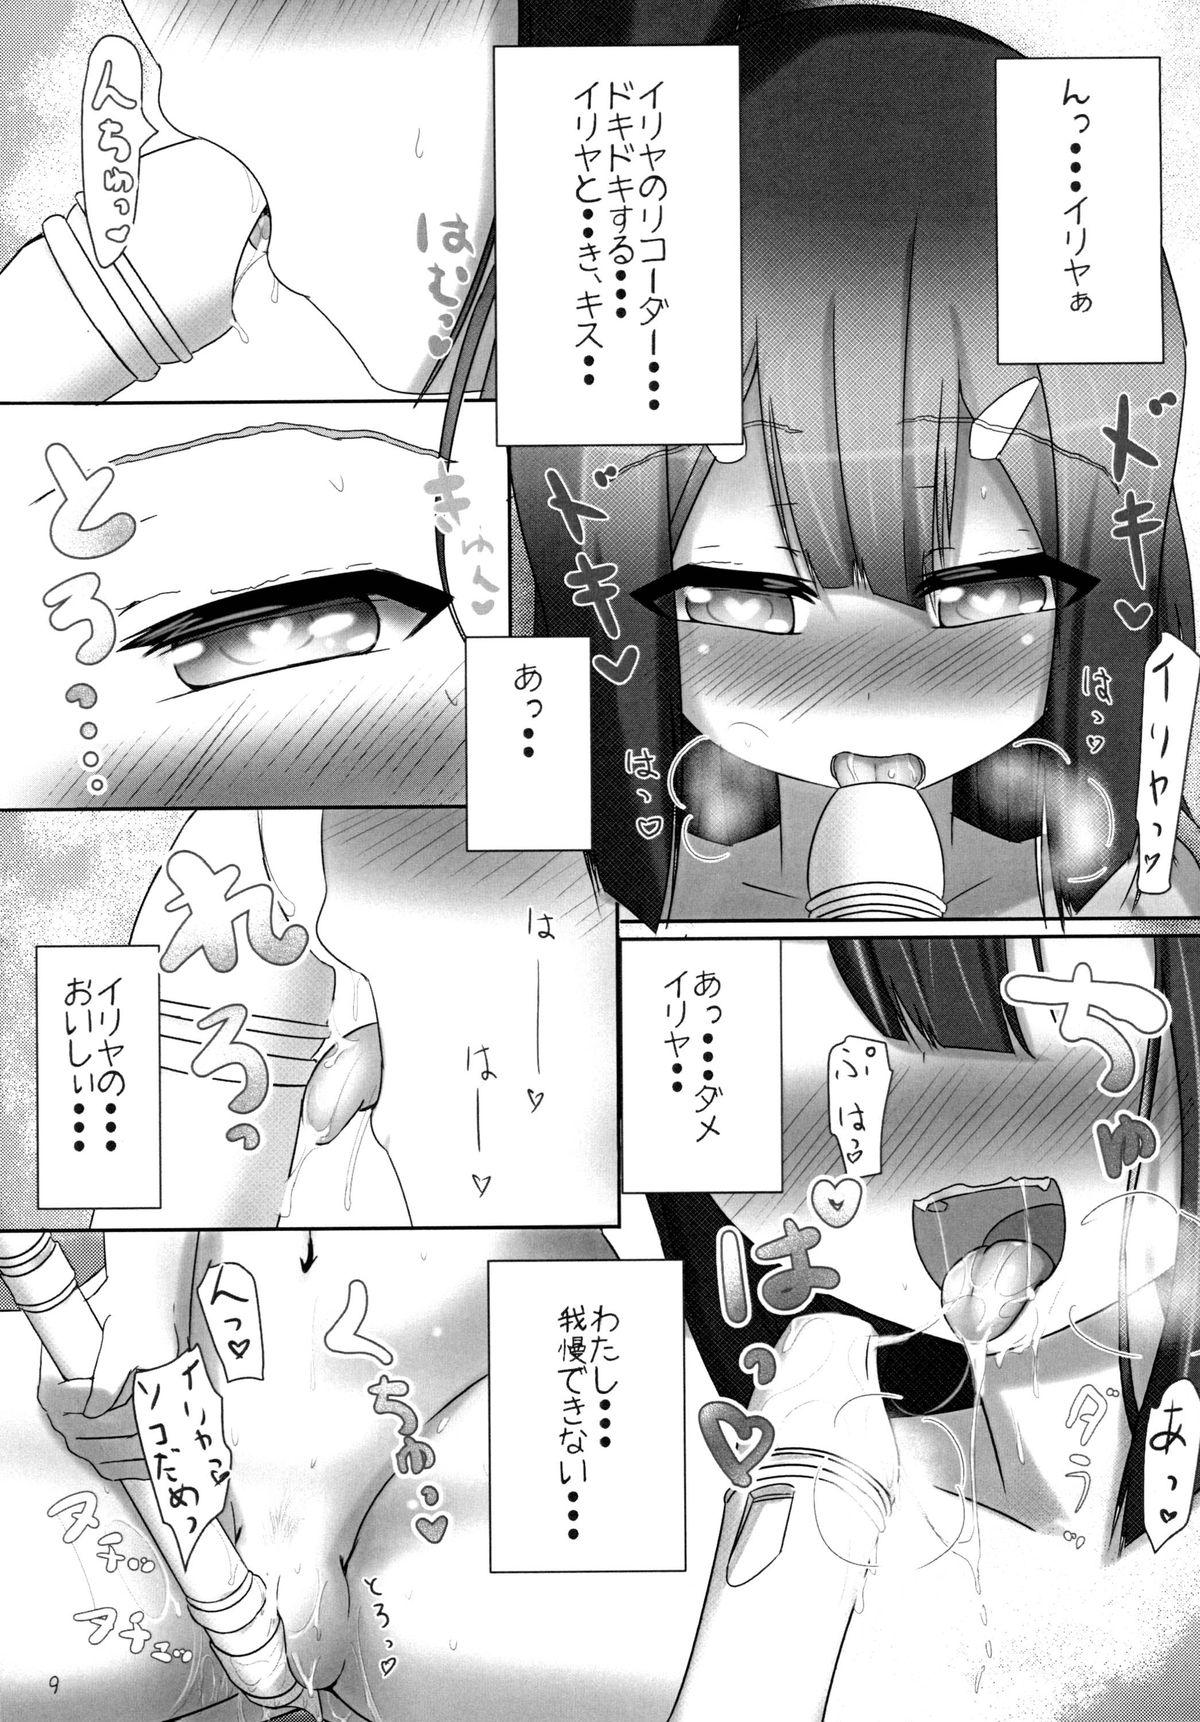 Perrito Fuechupa Shoujo - Fate kaleid liner prisma illya Story - Page 8